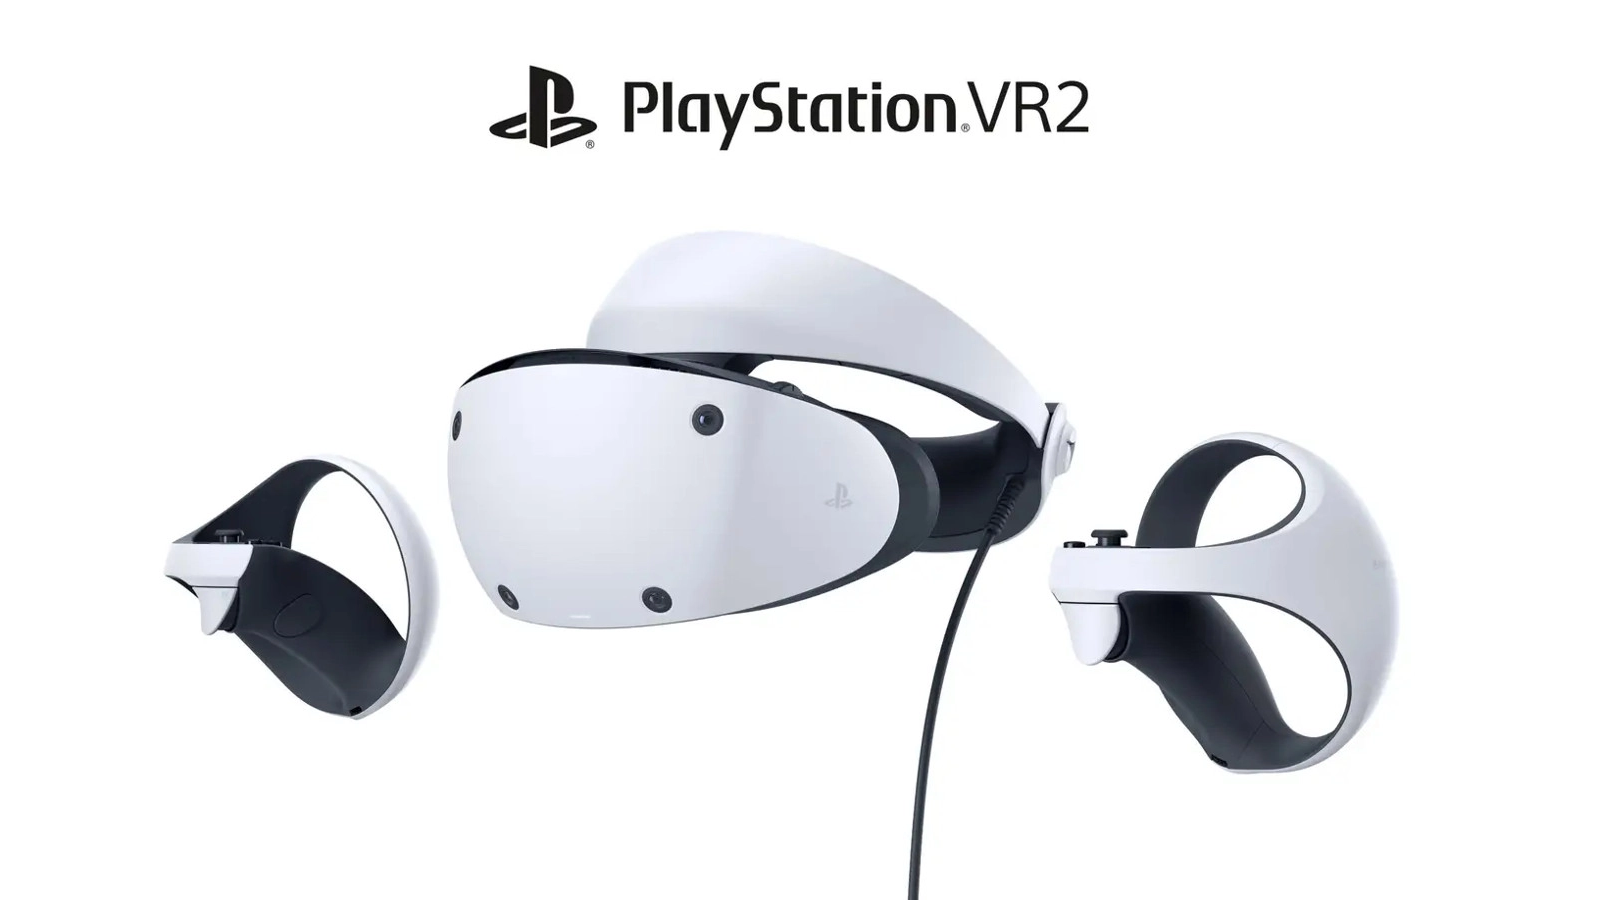 Sony has officially unveiled the PSVR2 headset